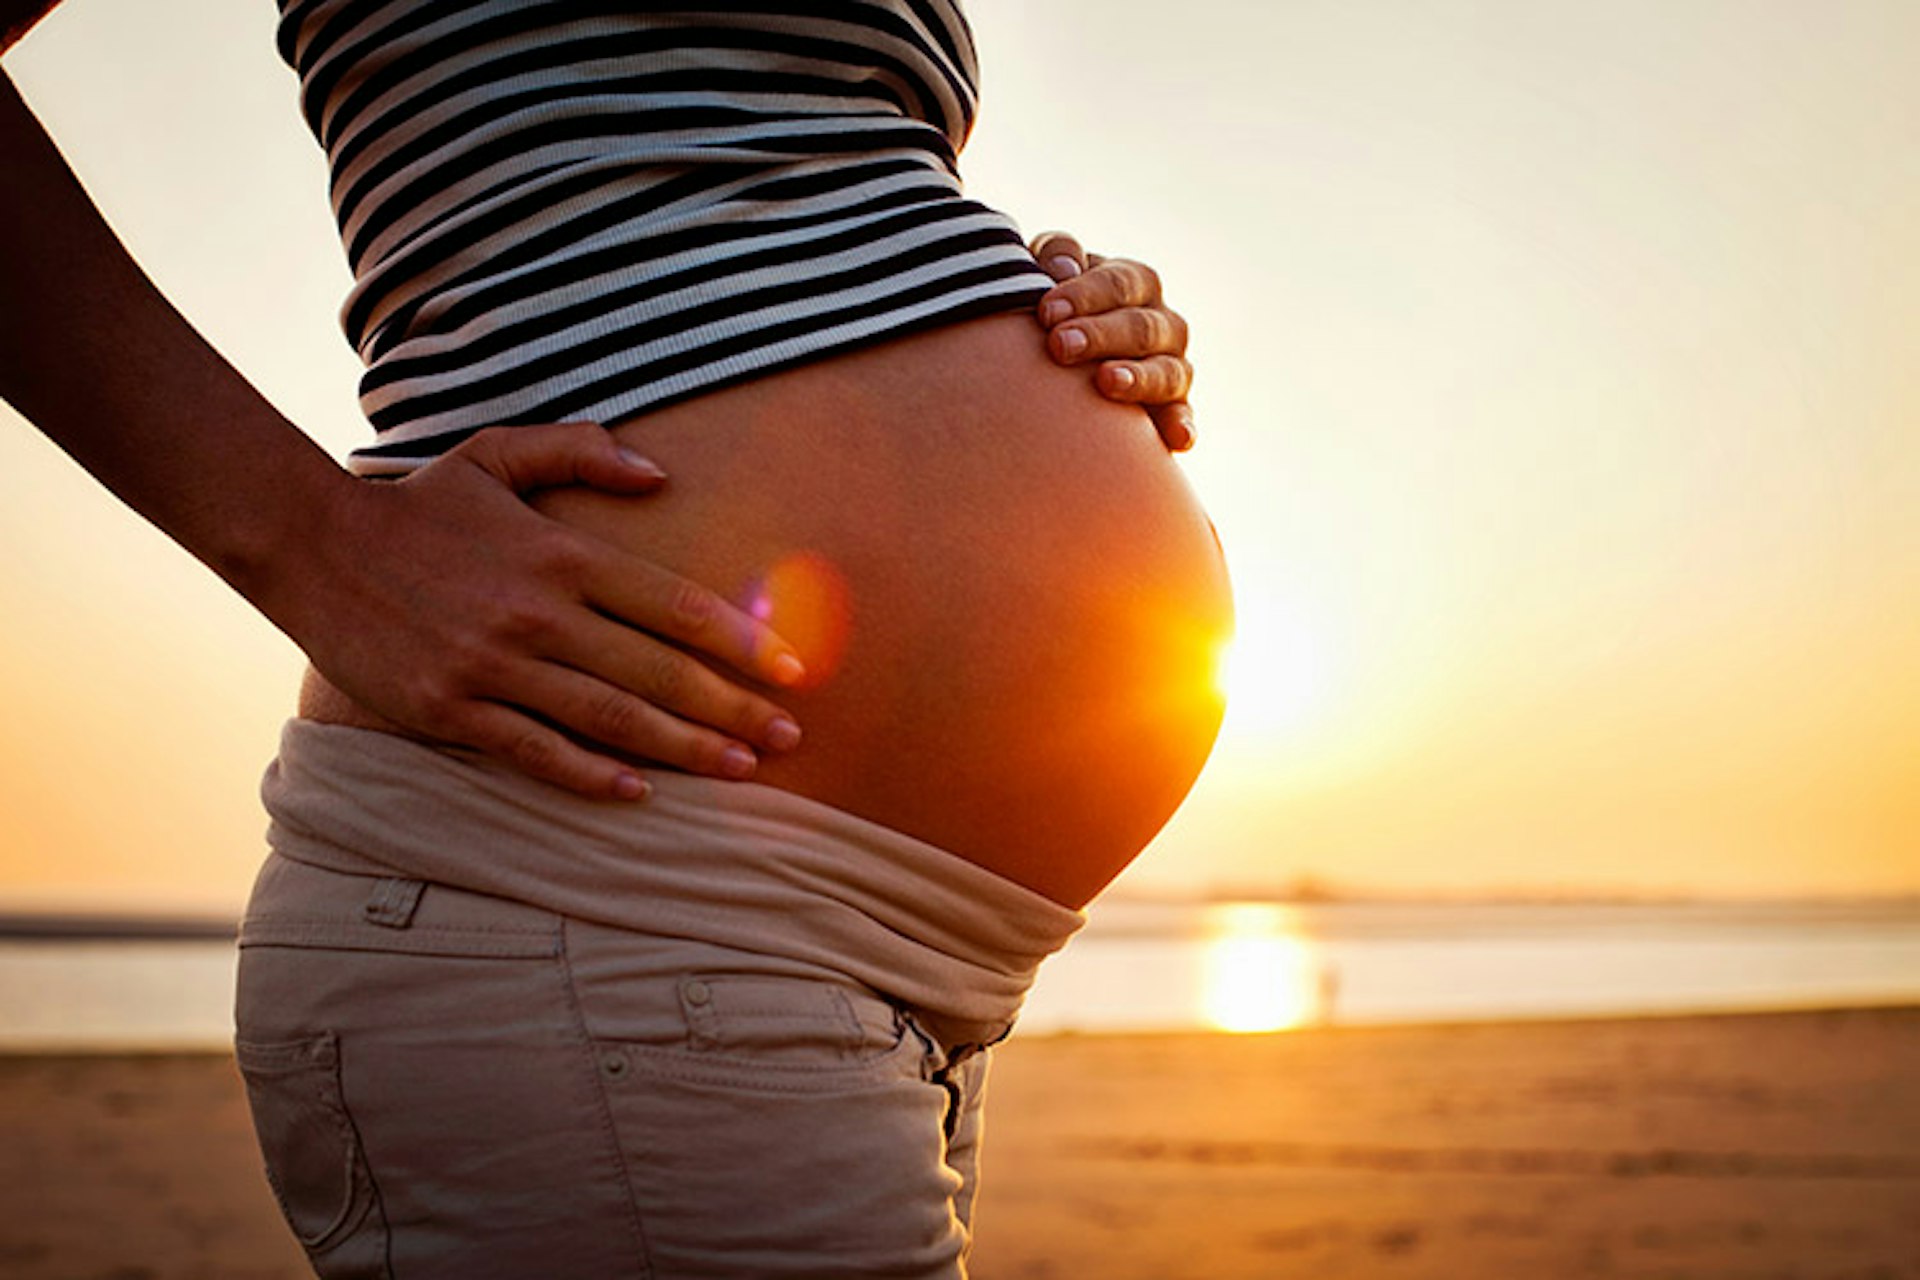 An image of a woman on the beach showing her baby bump as the sun sets in the background